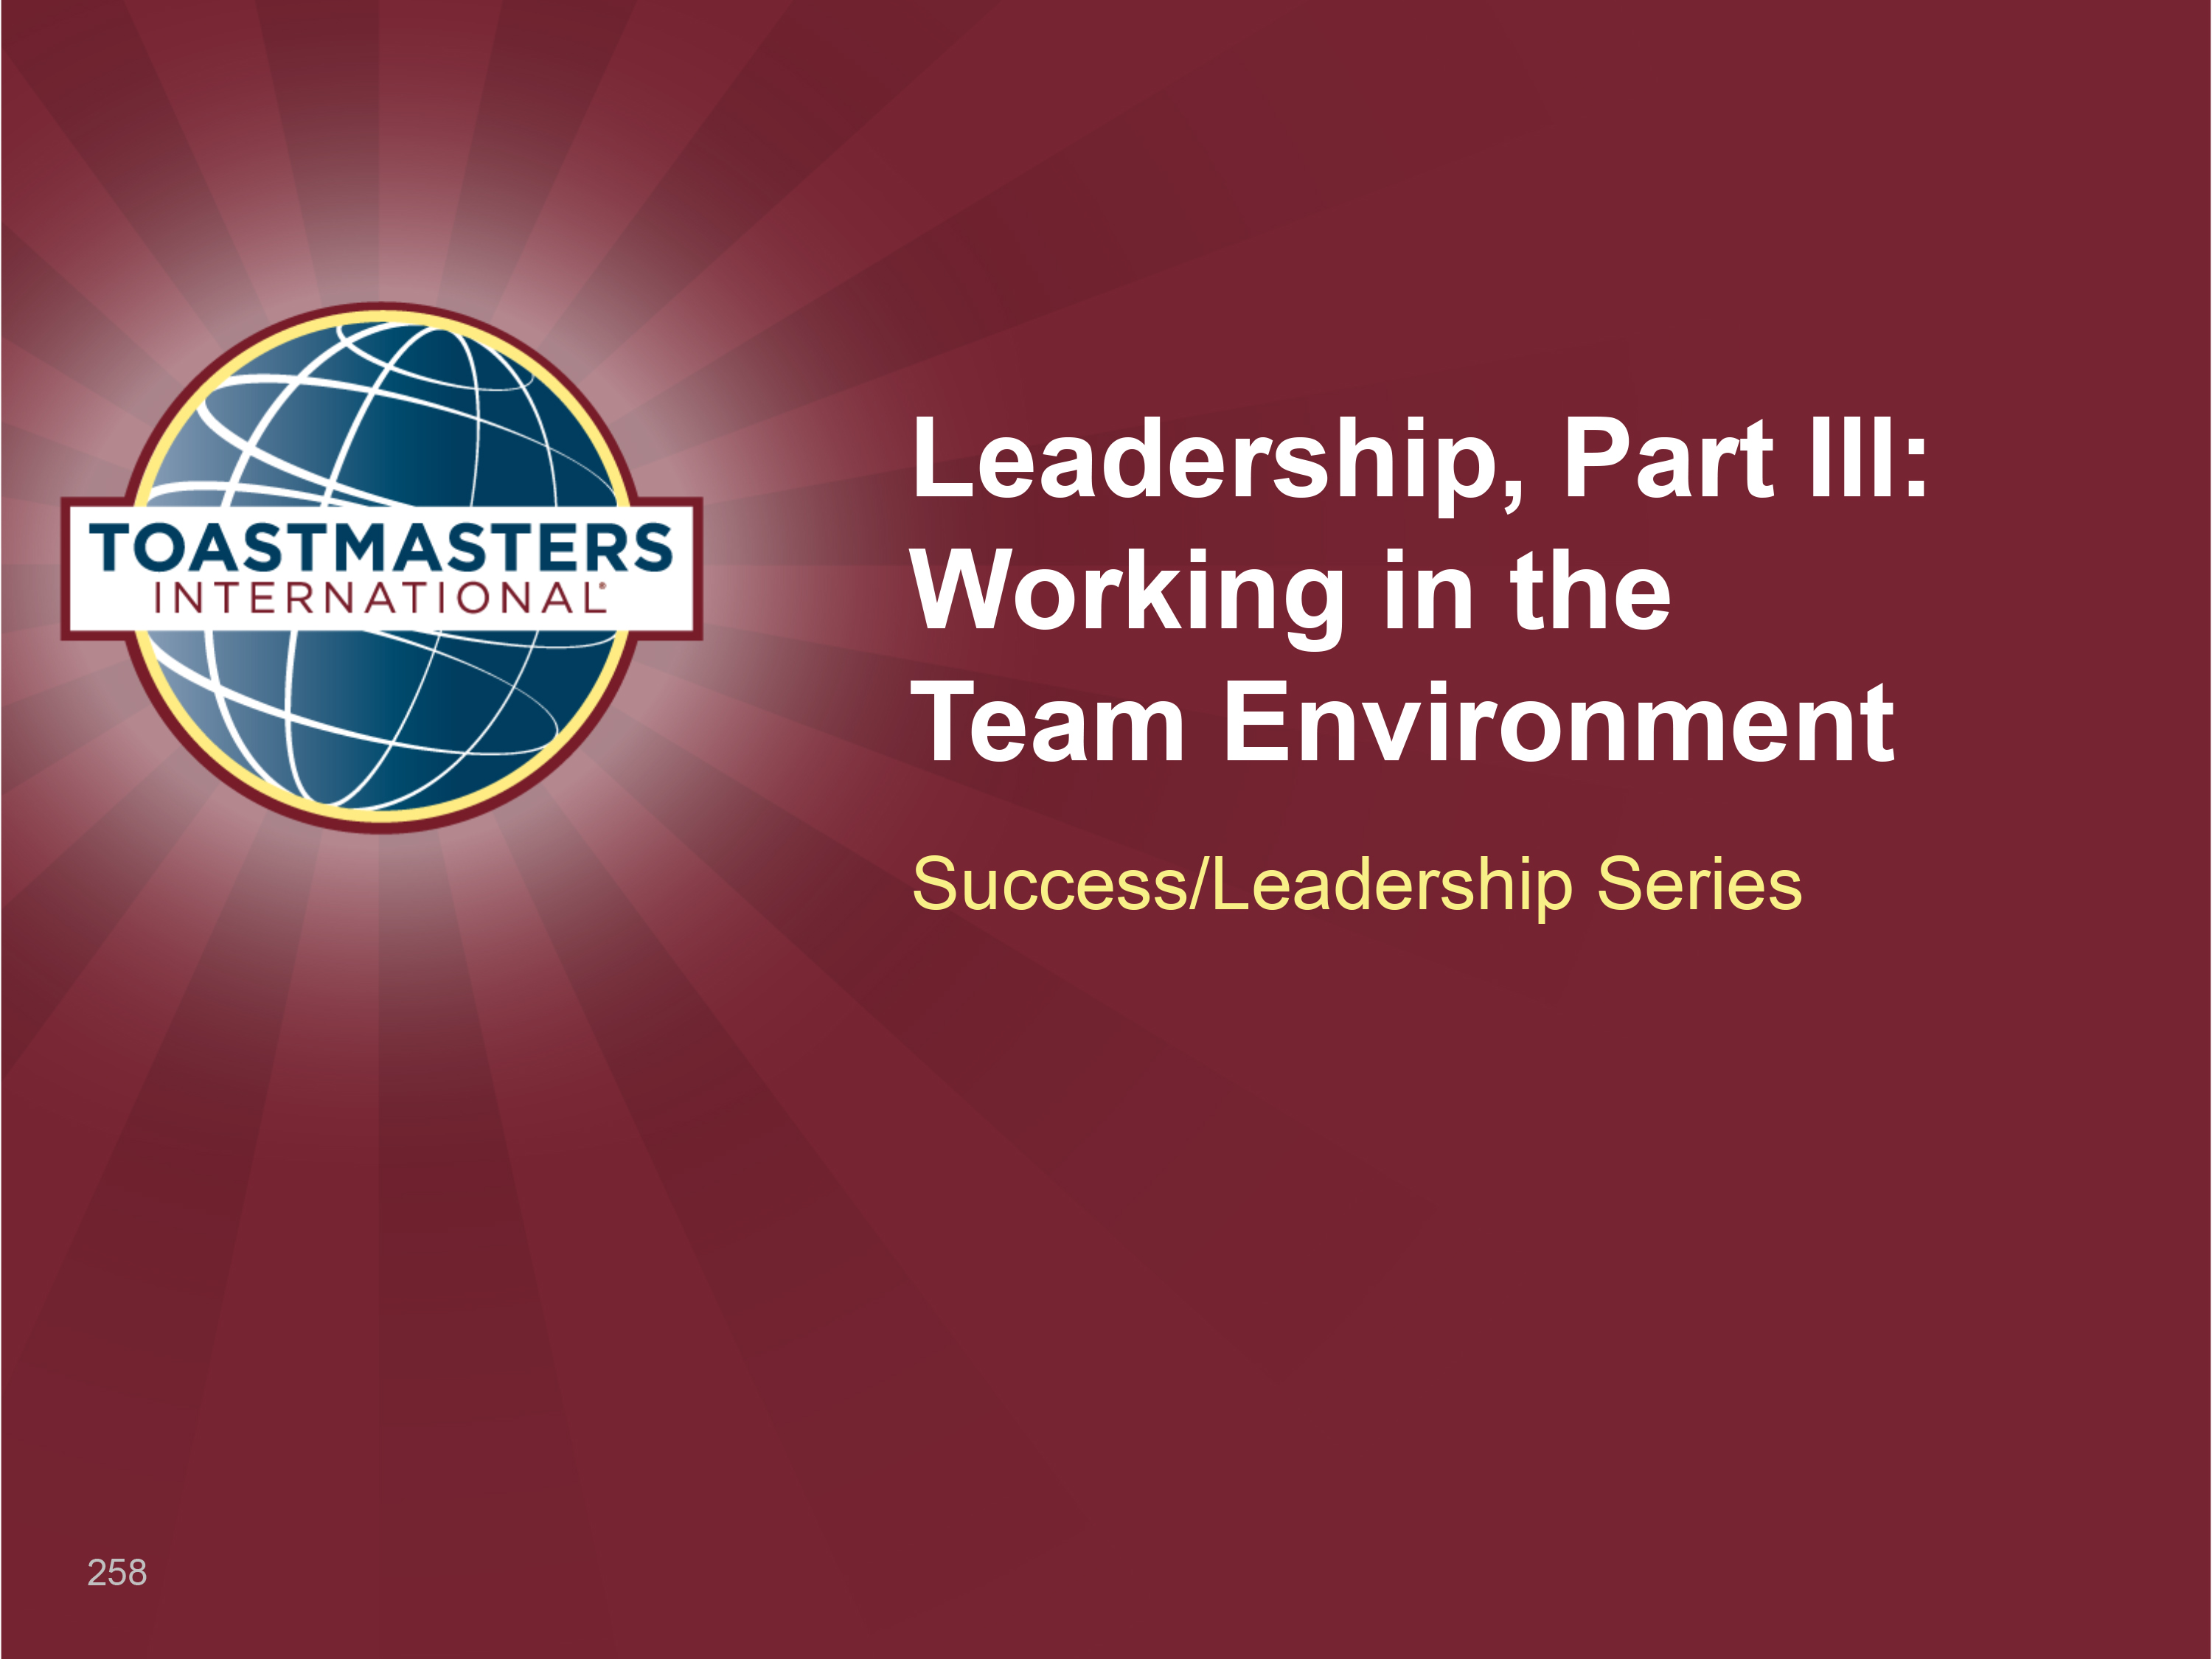 Leadership, Part III: Working in the Team Environment (PPT)